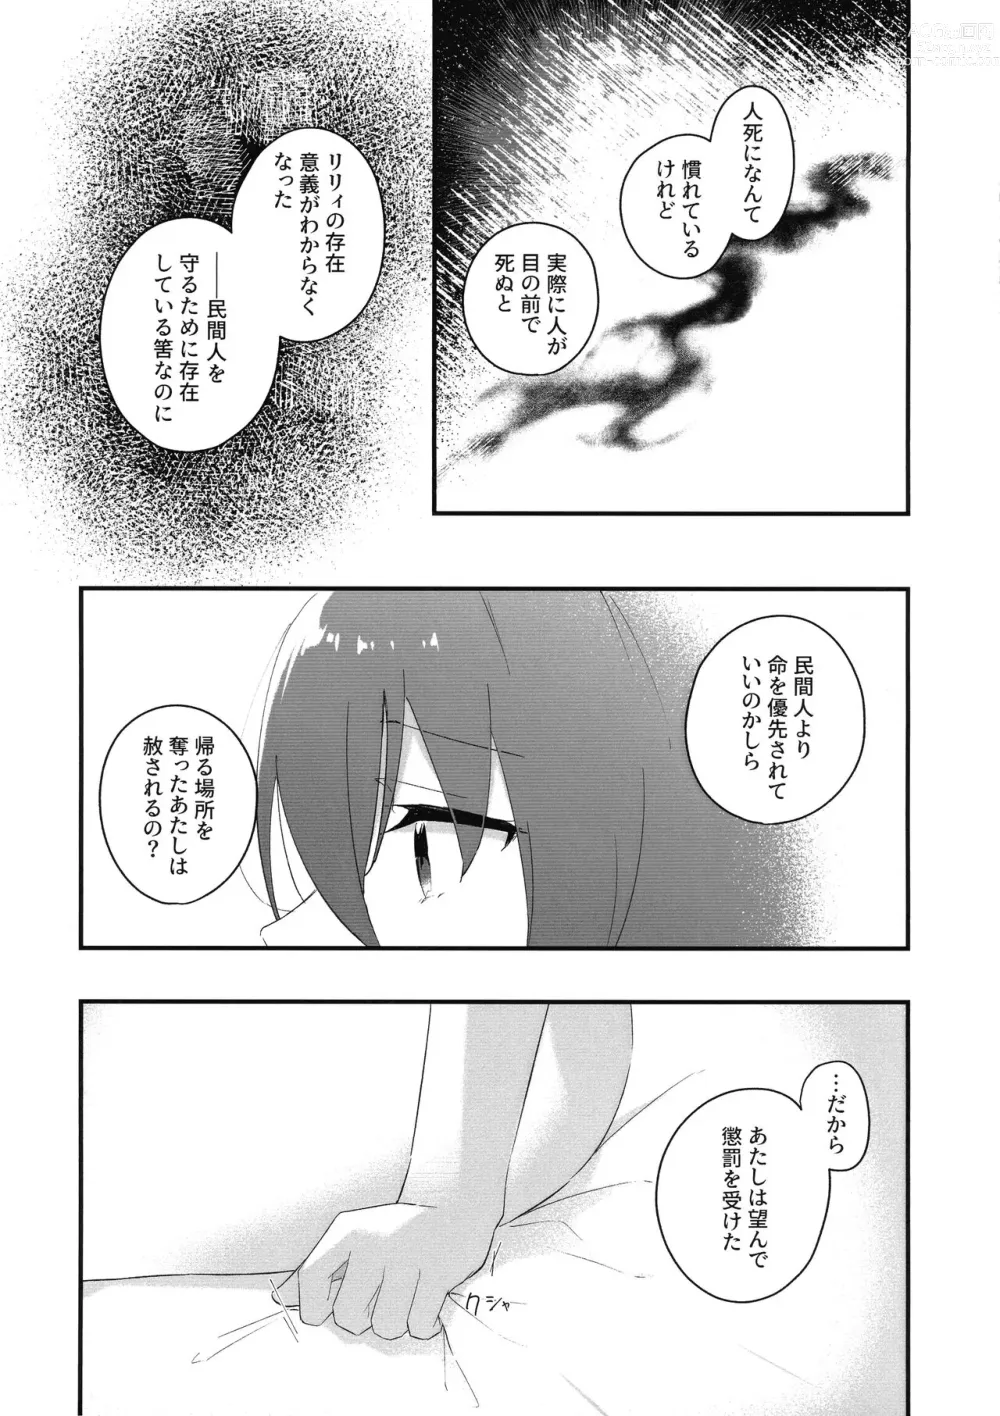 Page 10 of doujinshi Mabataki - without blink, could not find it